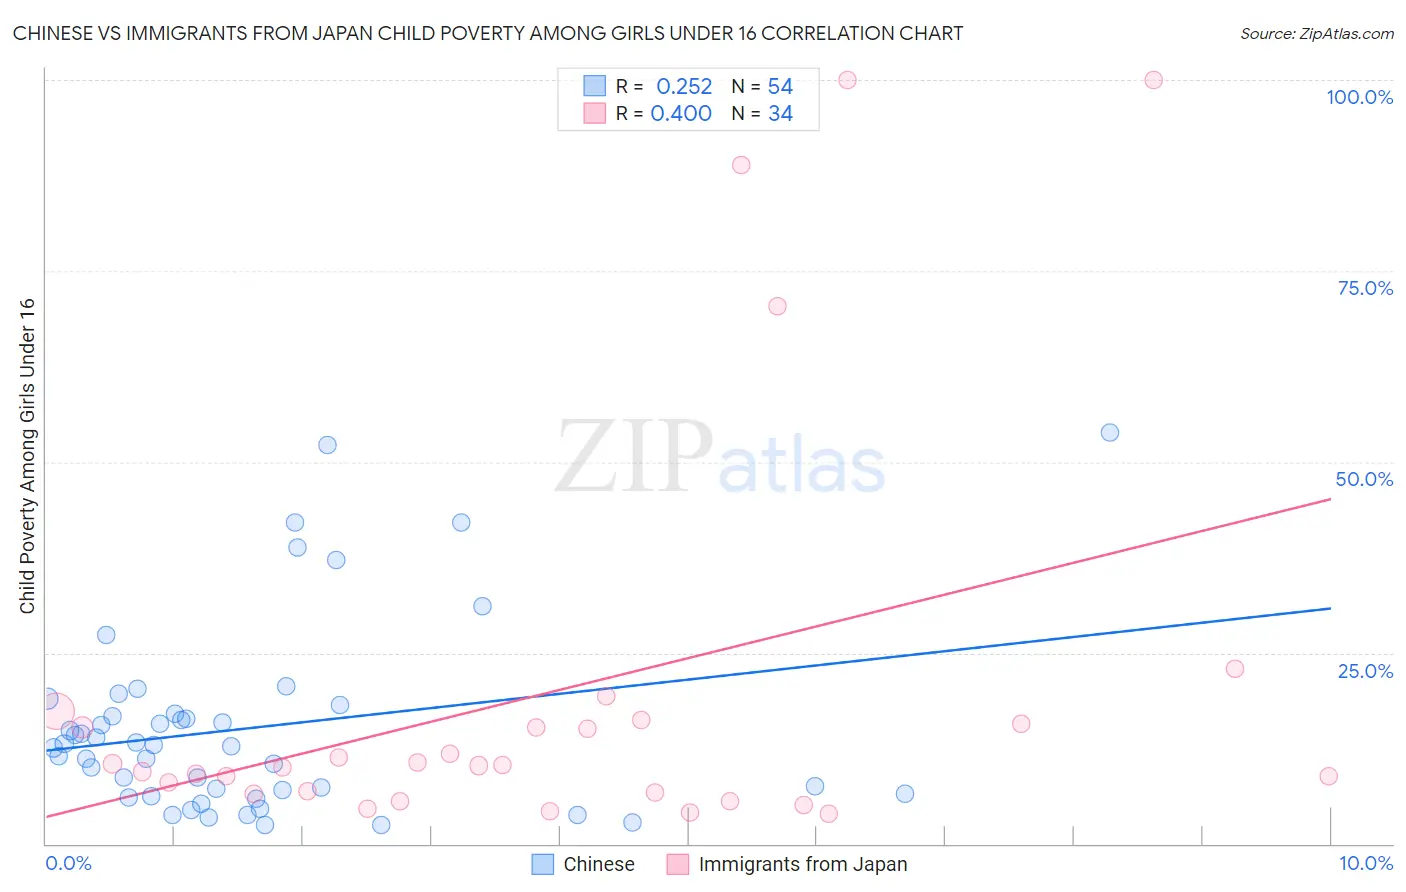 Chinese vs Immigrants from Japan Child Poverty Among Girls Under 16